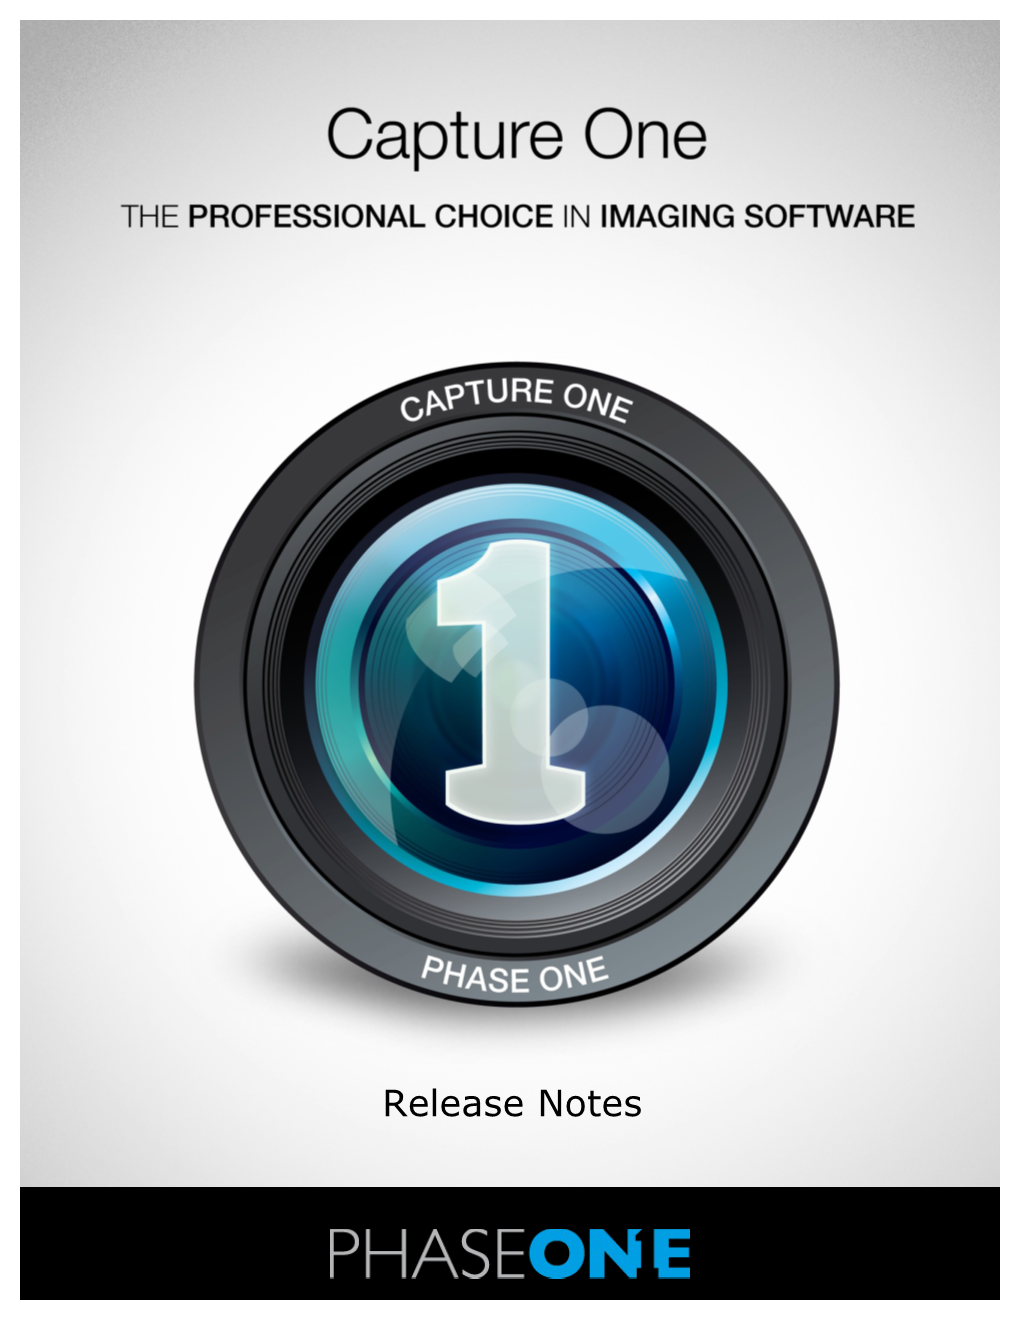 Capture One 7.1.4 Release Notes!